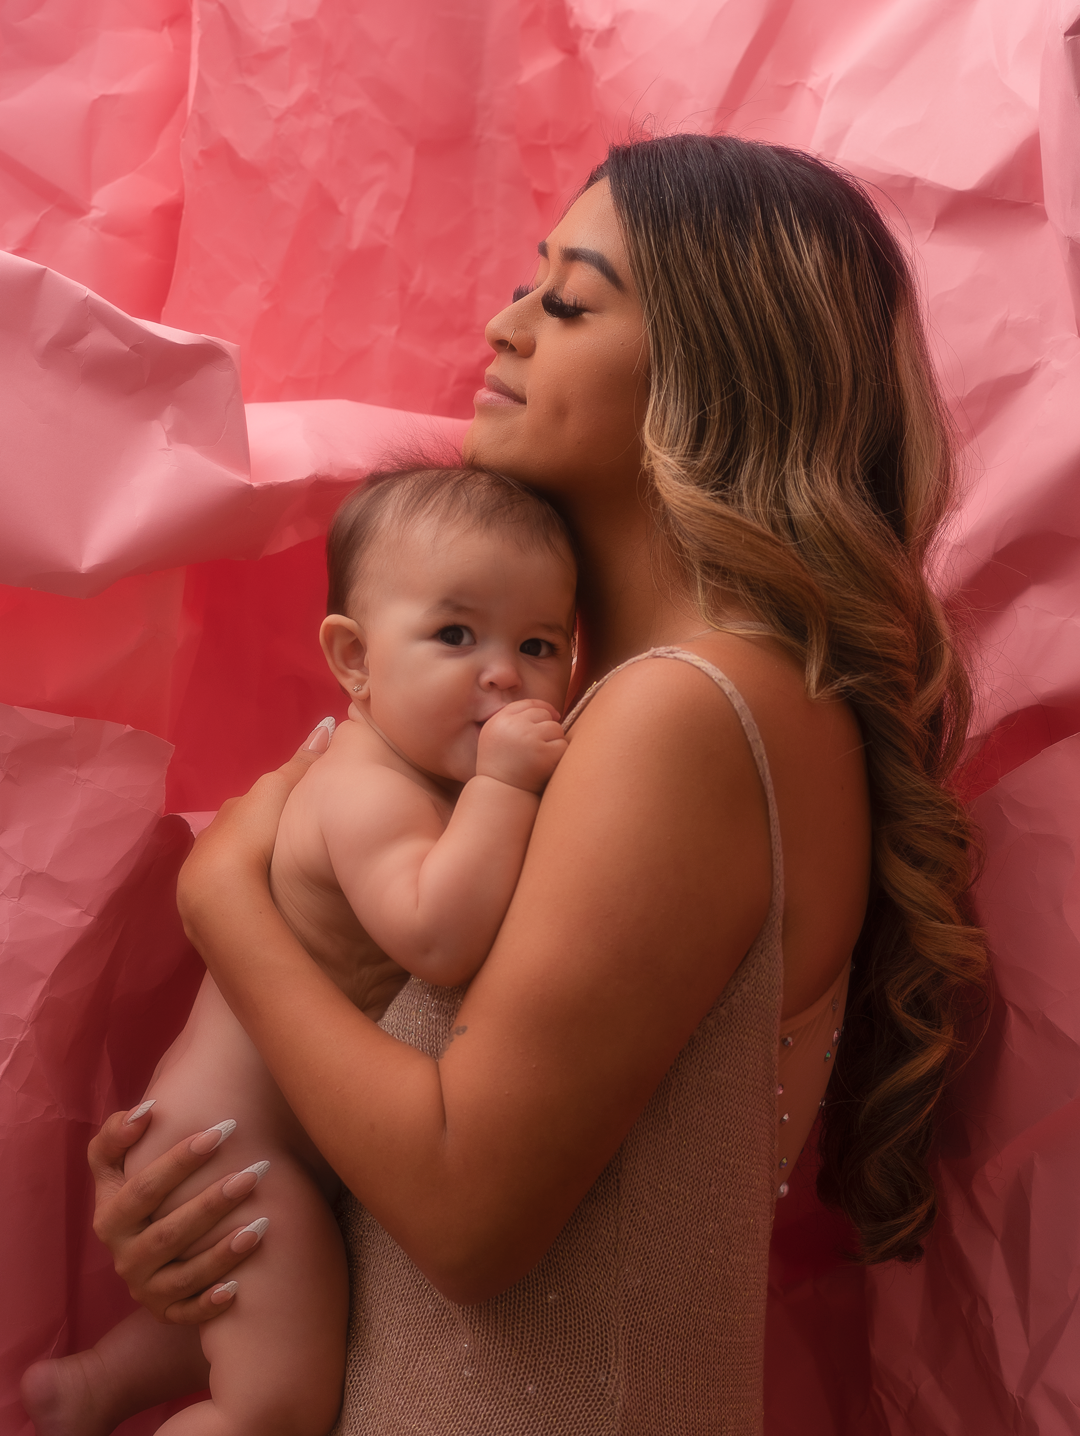 Mom embracing 9 month old daughter in crazy backdrop